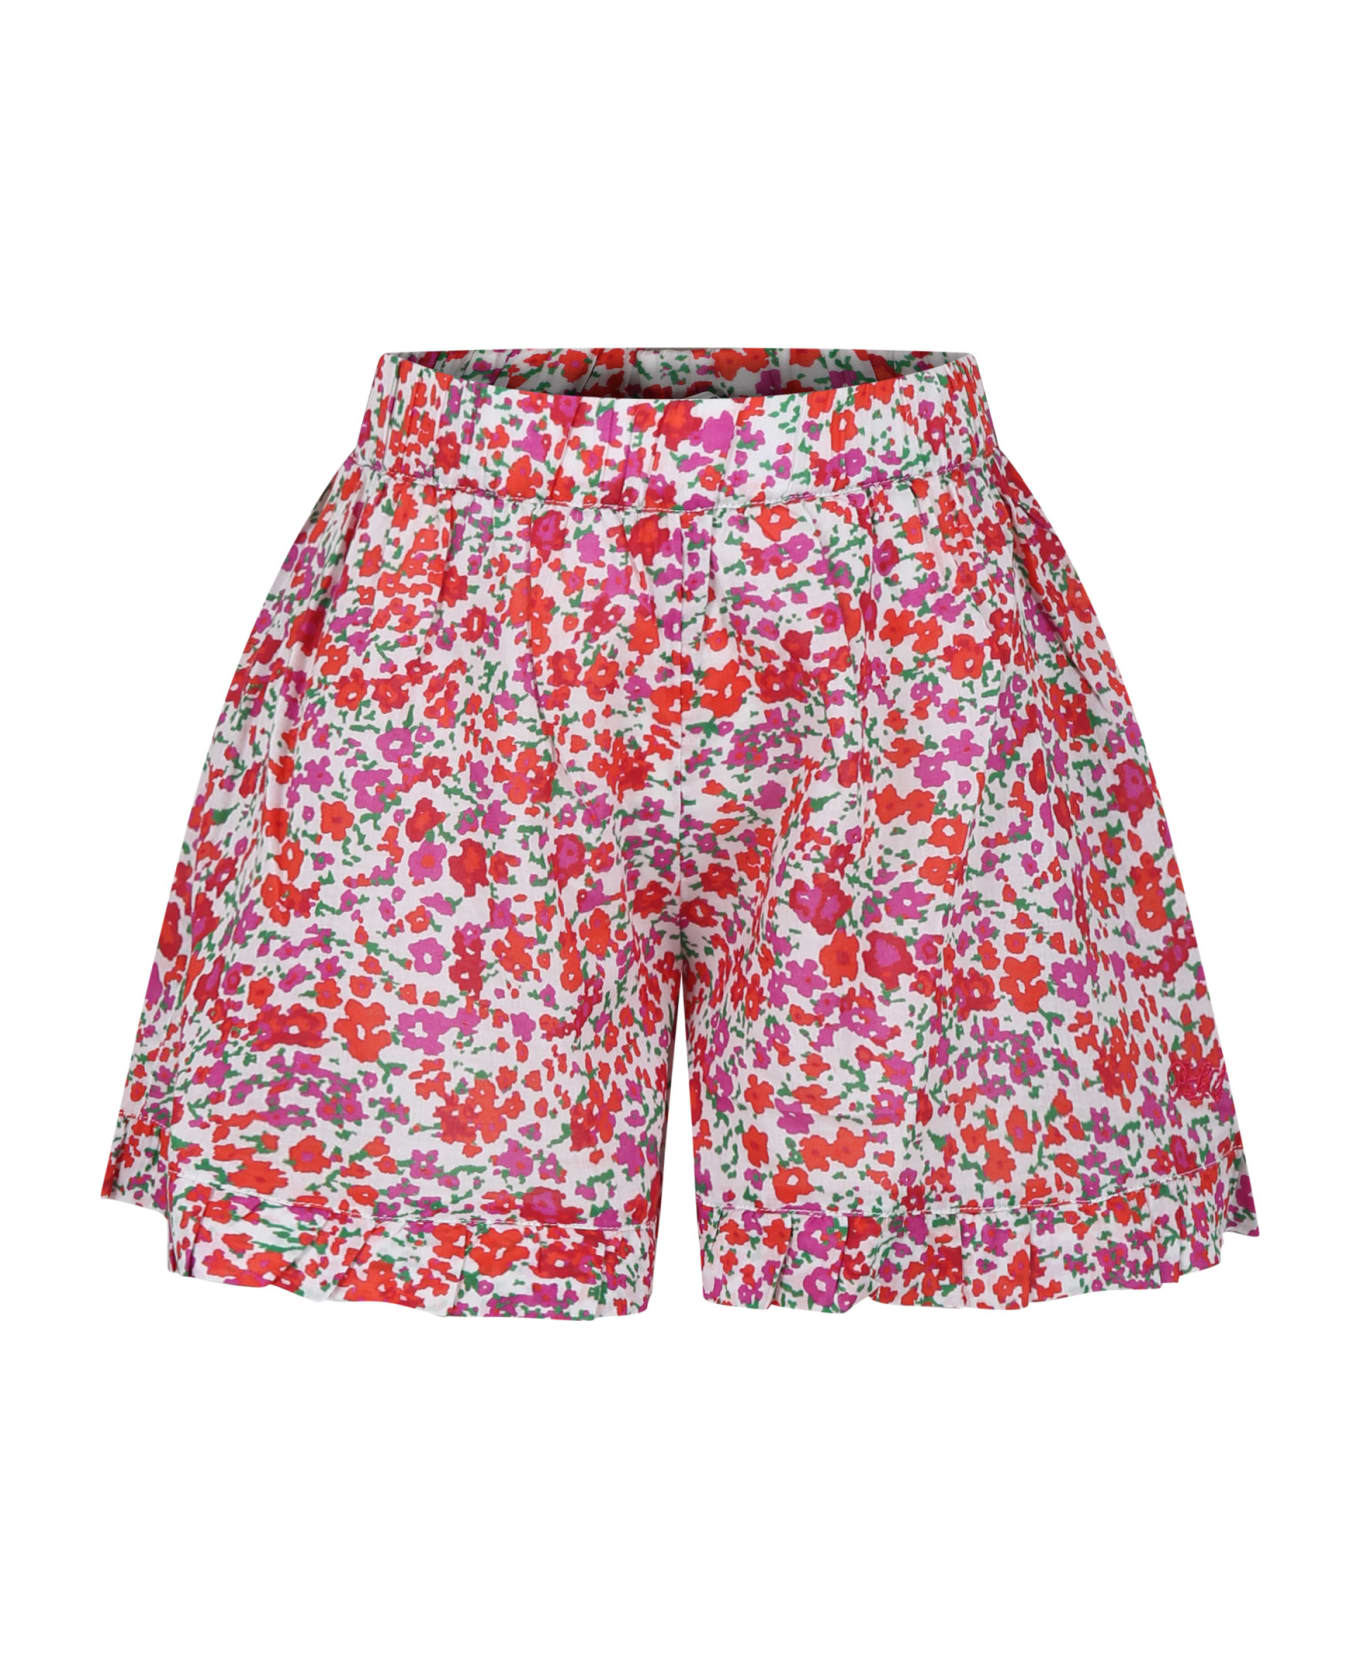 Philosophy di Lorenzo Serafini Kids White Shorts For Girl With Flowers - Multicolor ボトムス